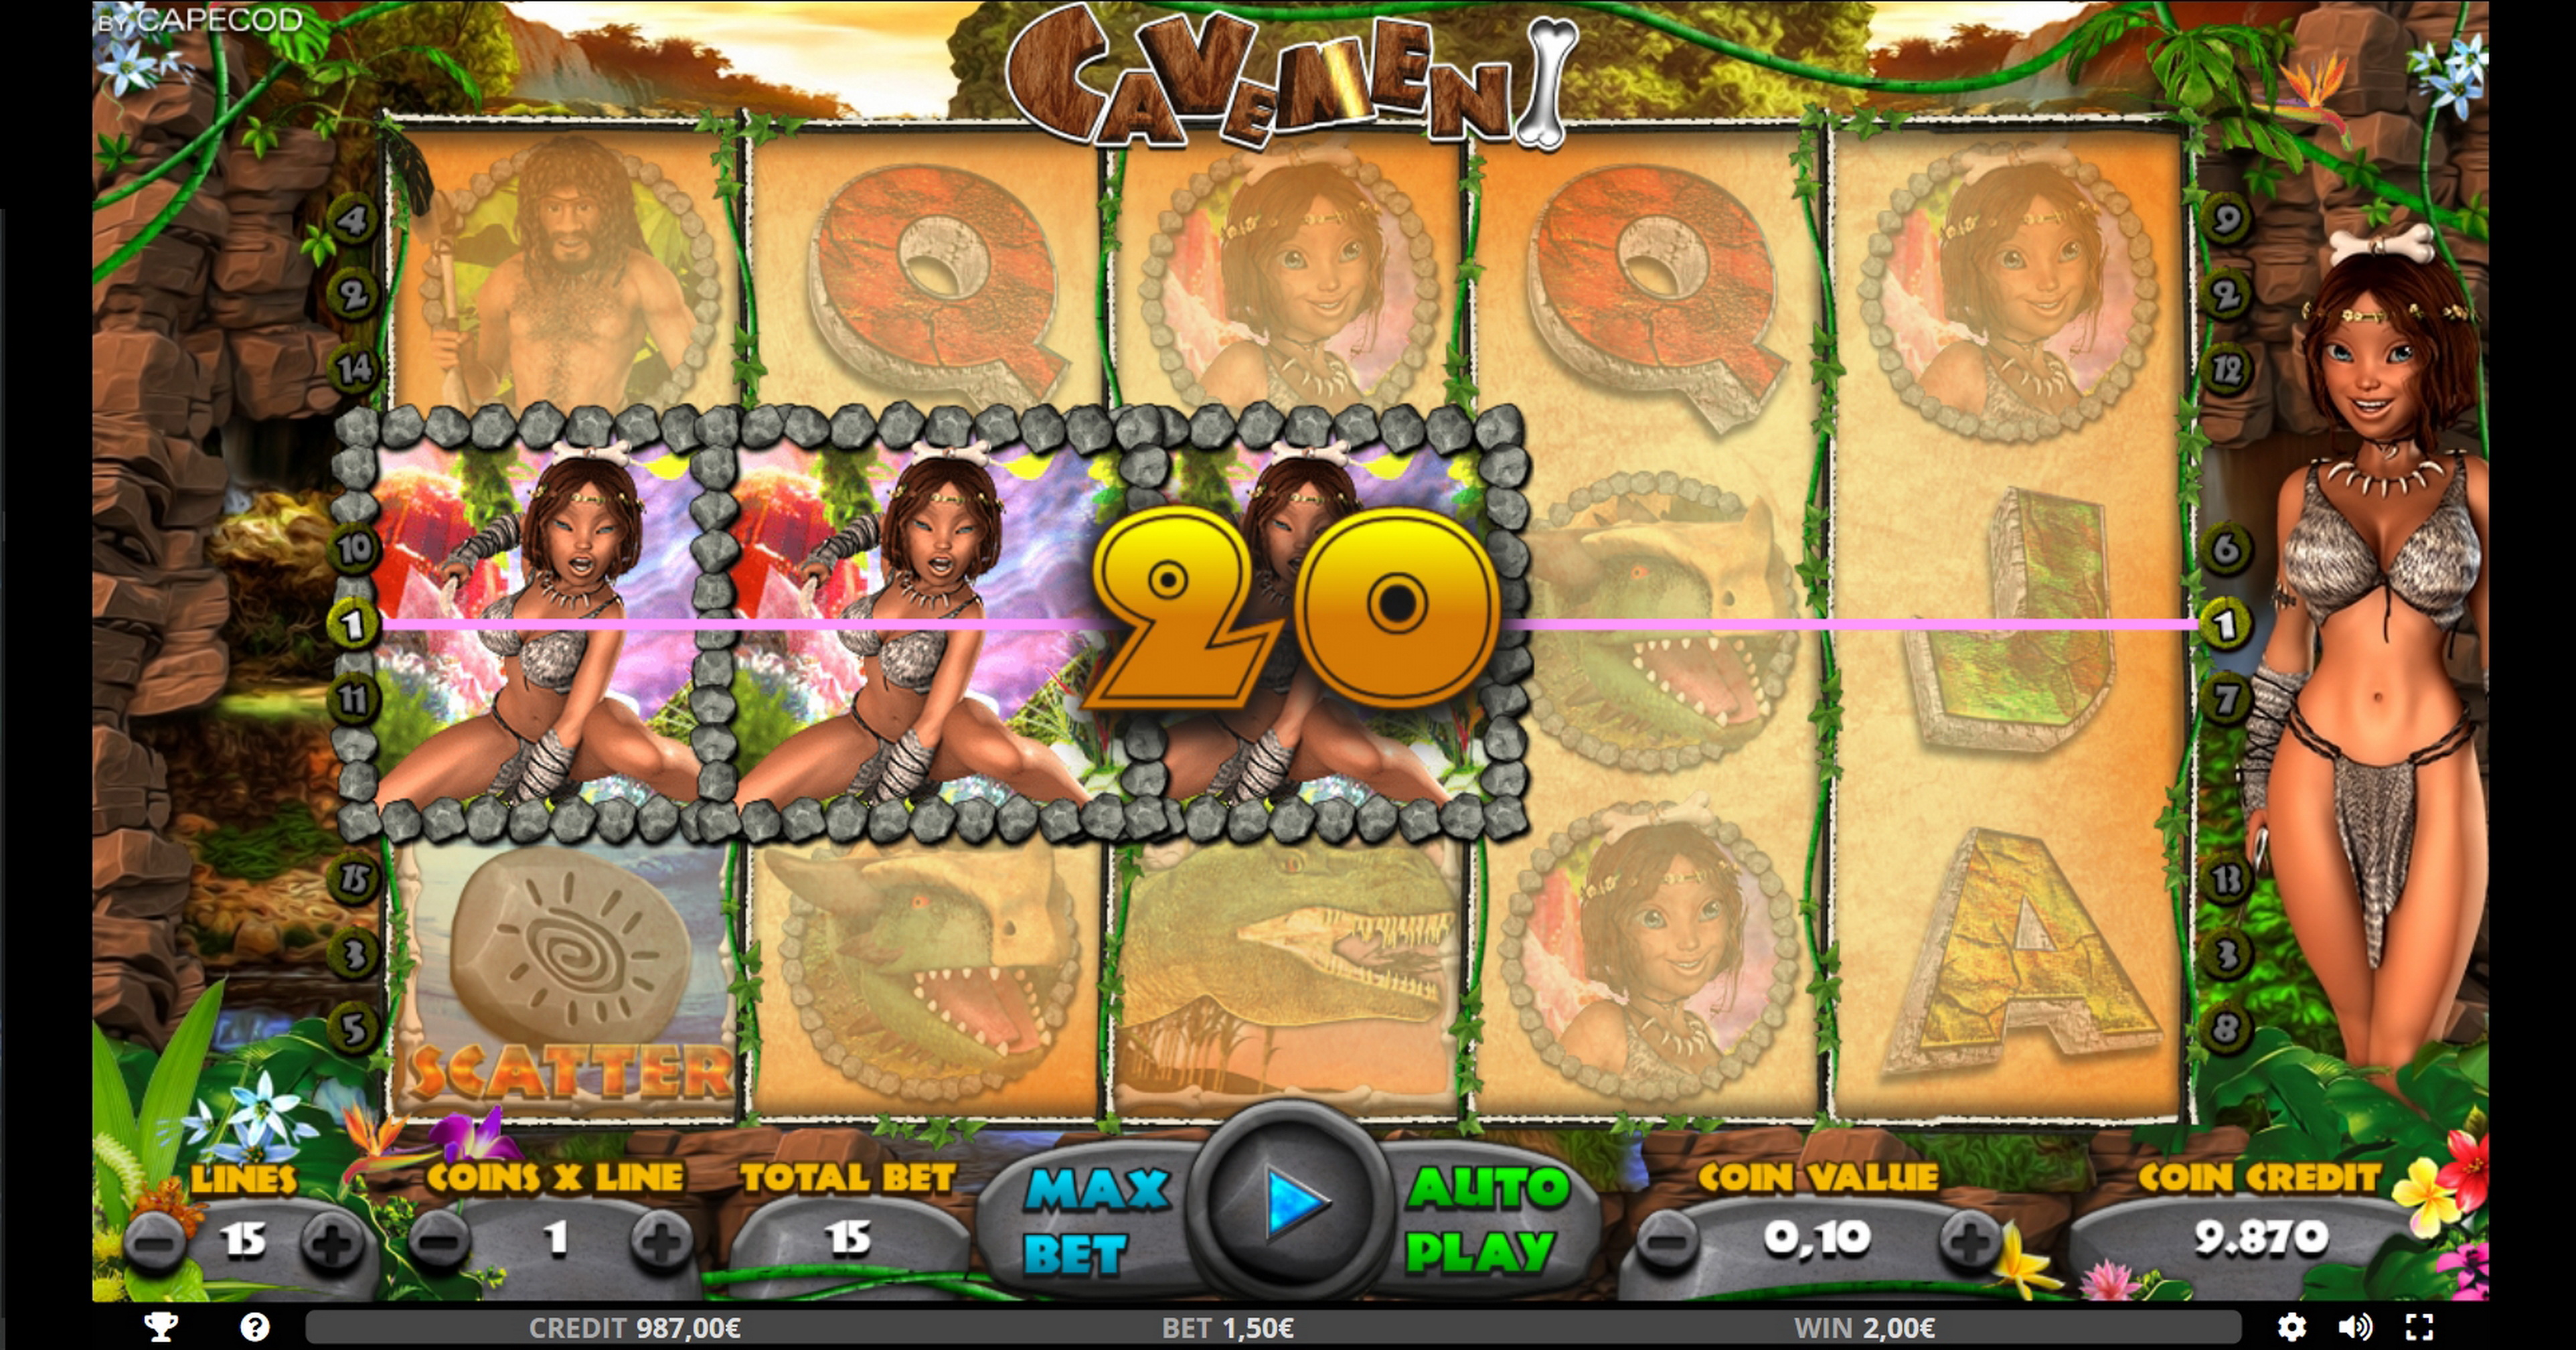 Win Money in Cavemen Free Slot Game by Capecod Gaming